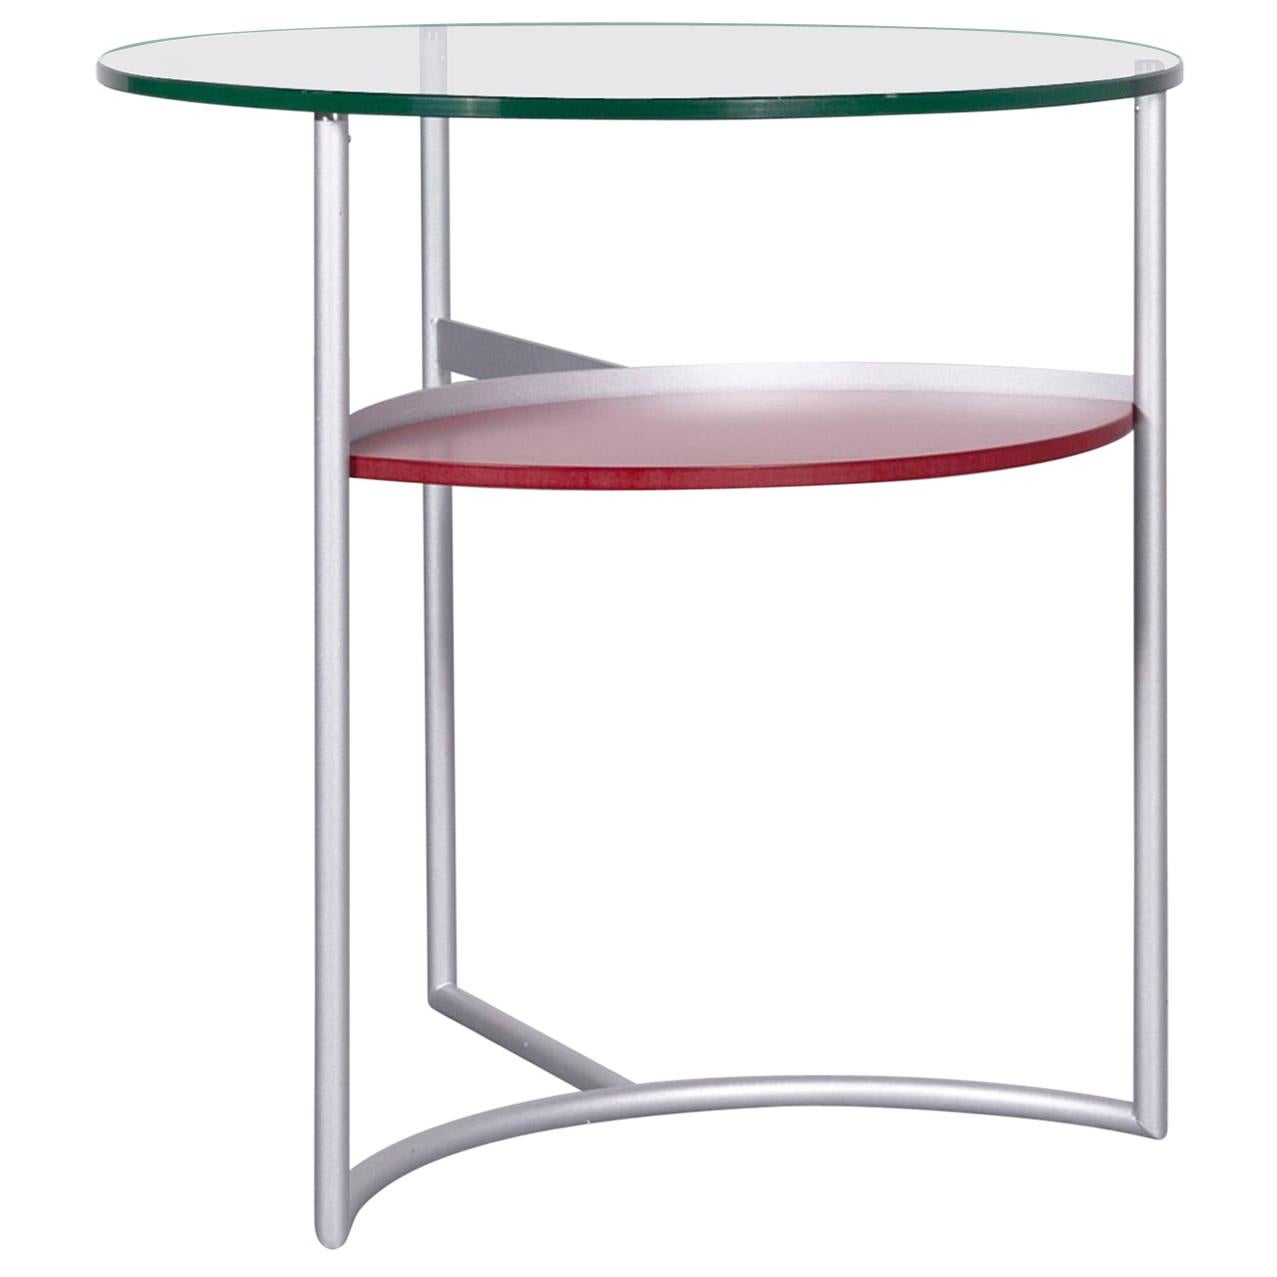 Rolf Benz Designer Glass Table Silver Chrome Coffee Table